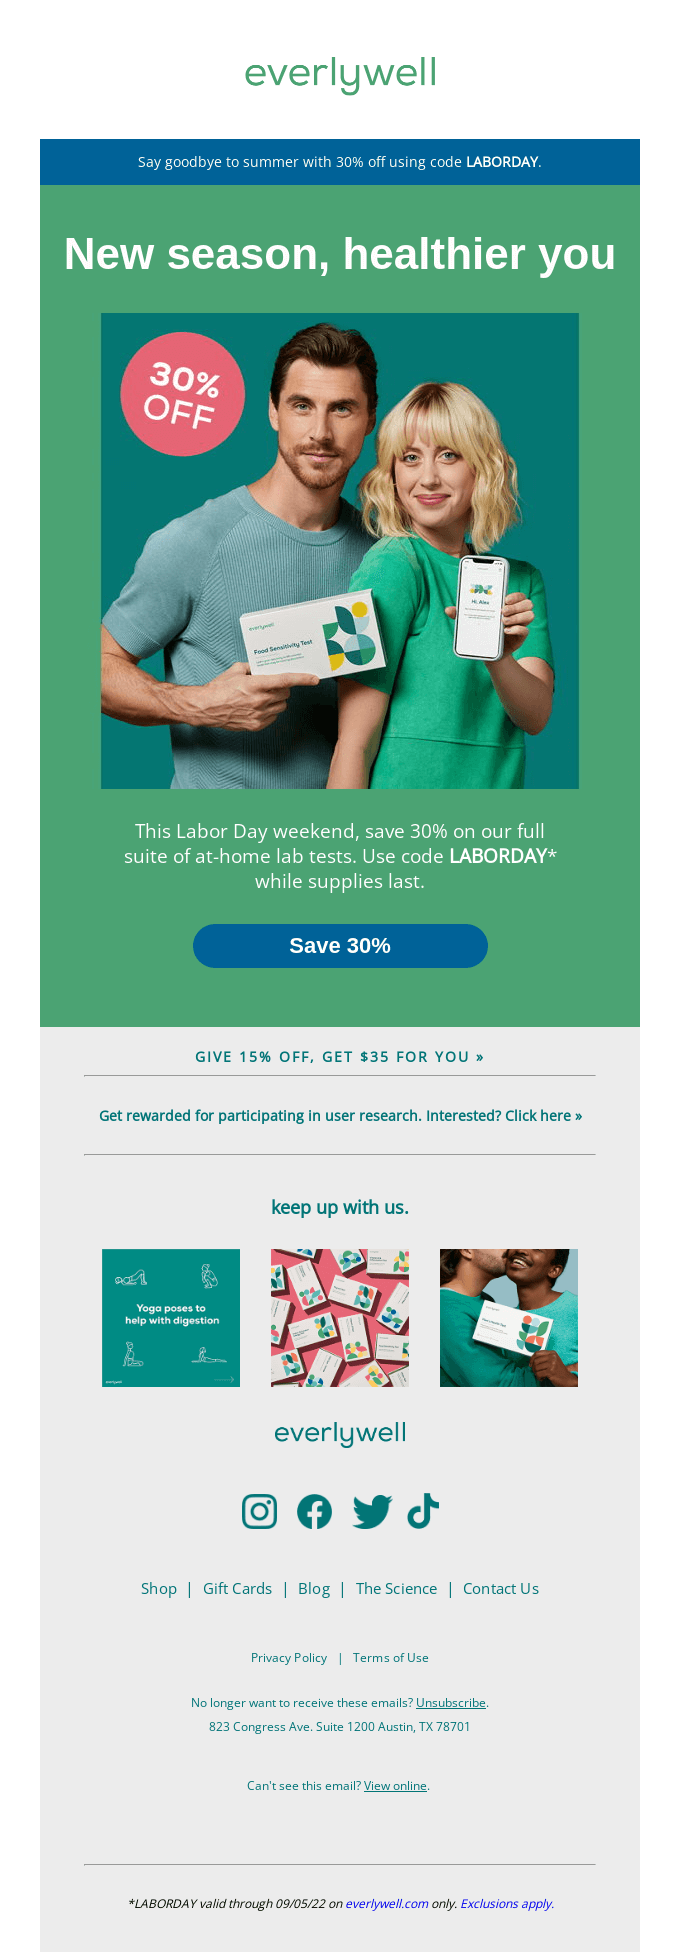 Everlywell- Labor Day email